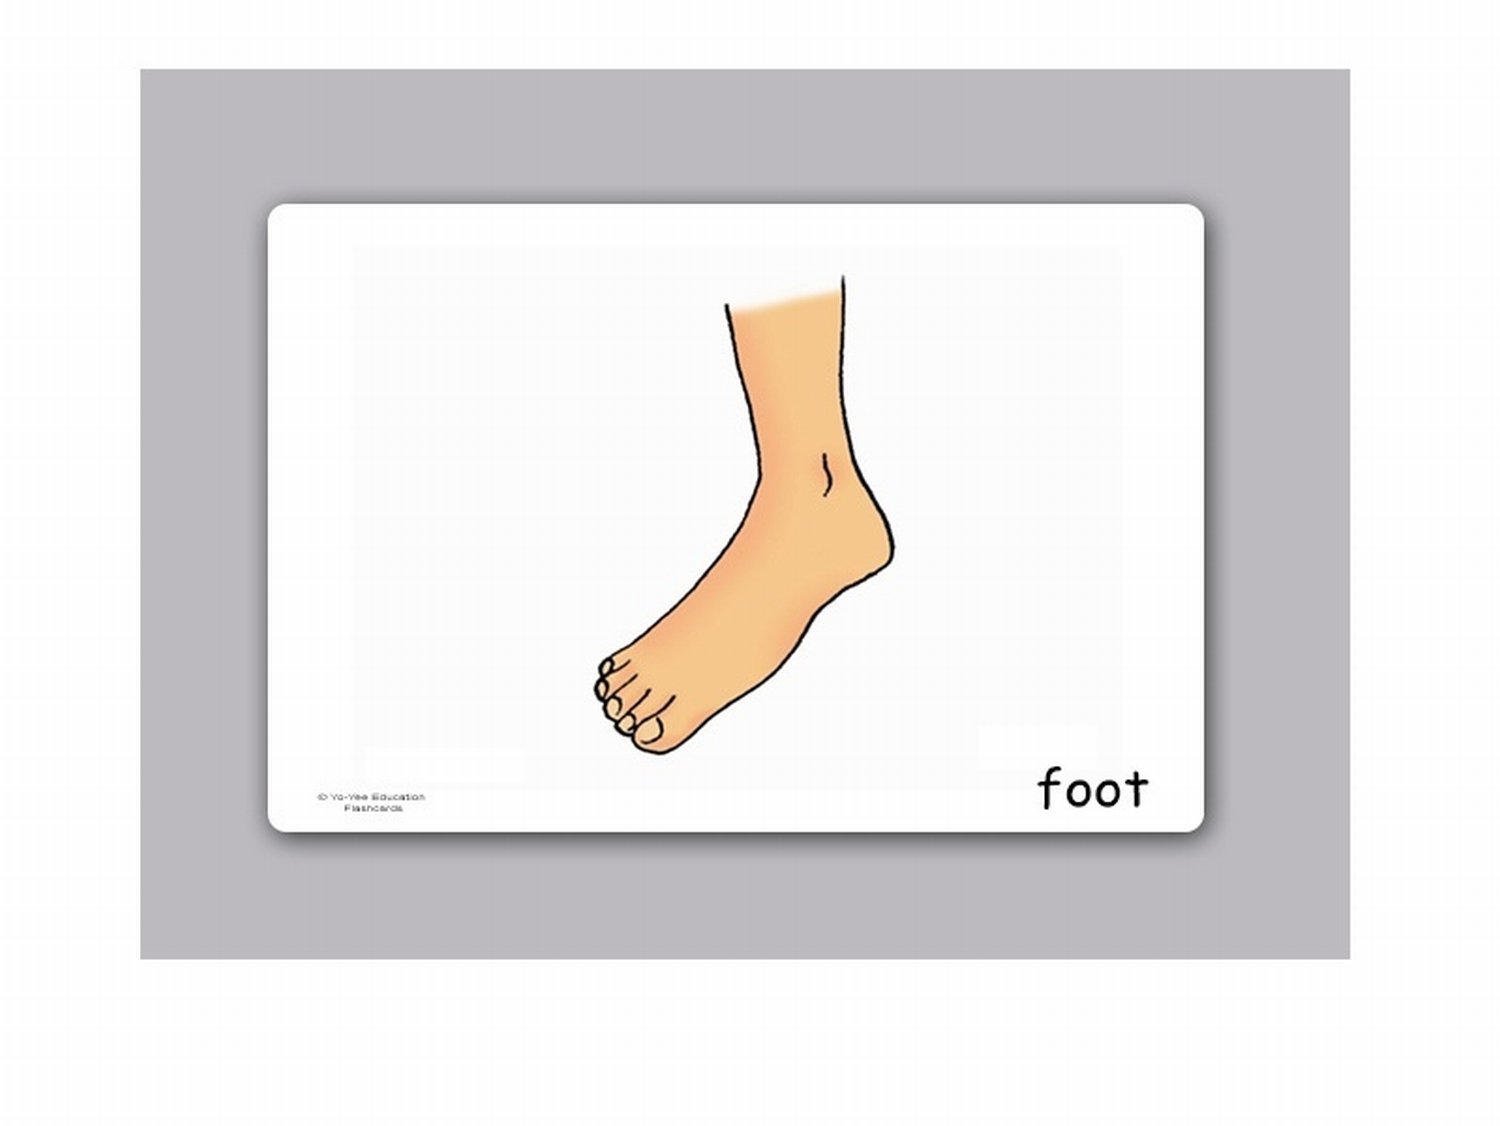 Body Parts Flash Cards for Language Learning in English - 英語フラッシュカード、絵カード、子供, 体の部分, 体